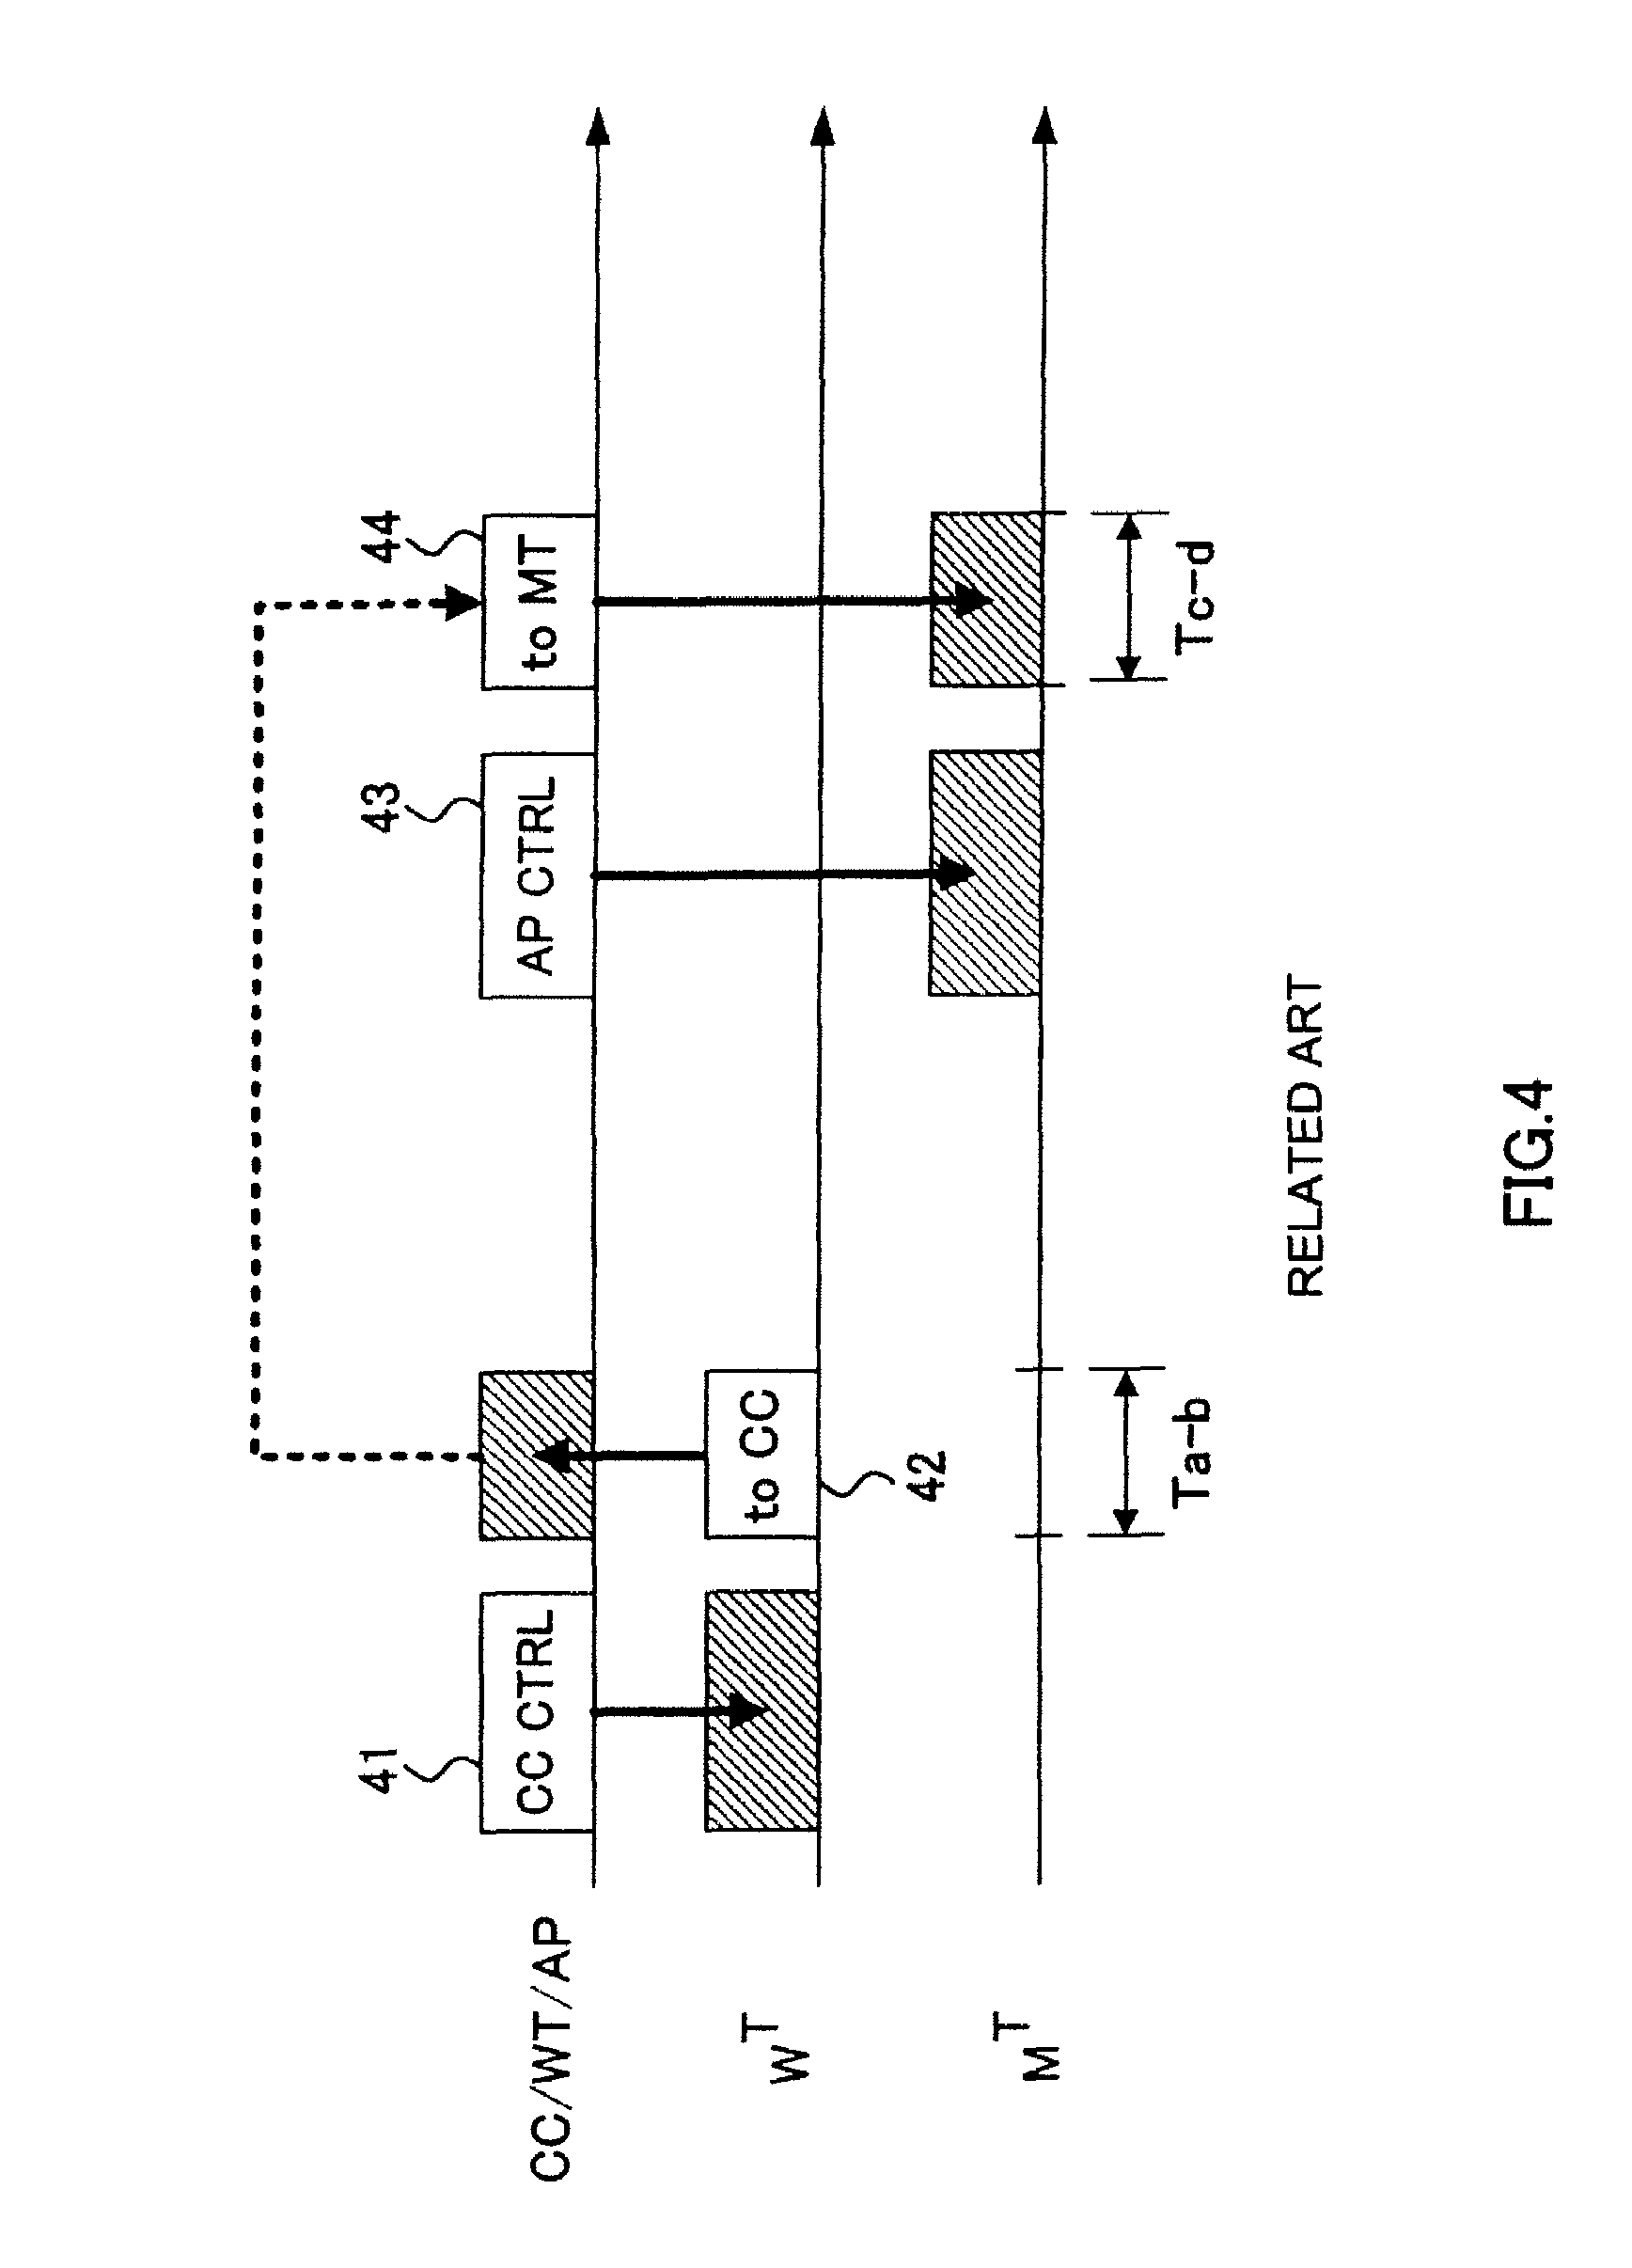 Communication terminal accommodation apparatus and scheduling method